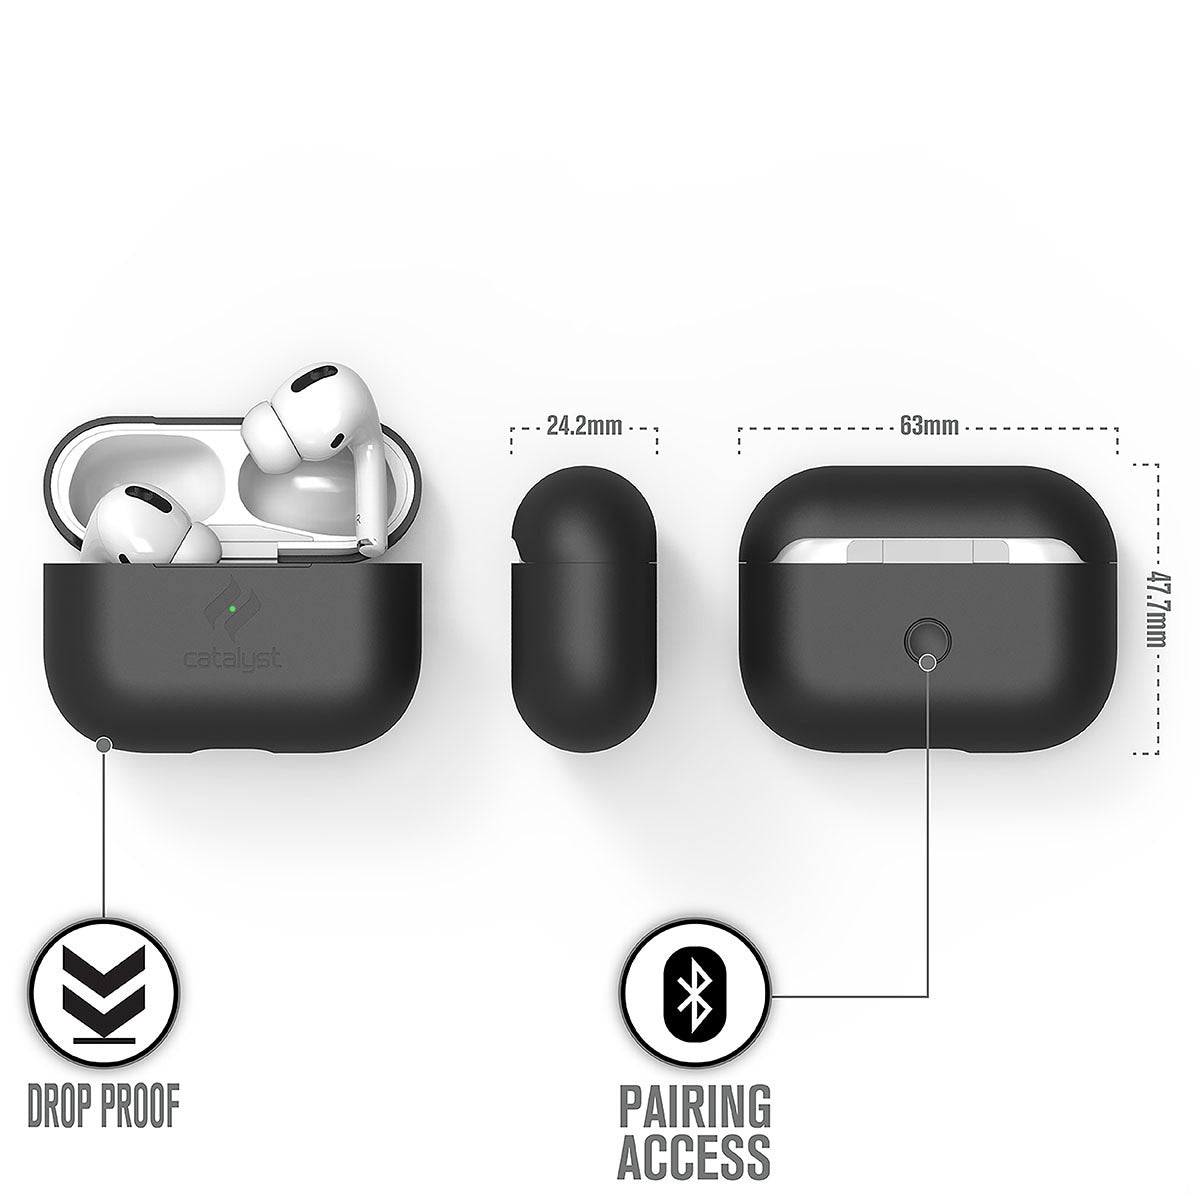 Catalyst airpods pro gen 2/1 slim case showing the case dimensions in a stealth black colorway text reads drop proof pairing access